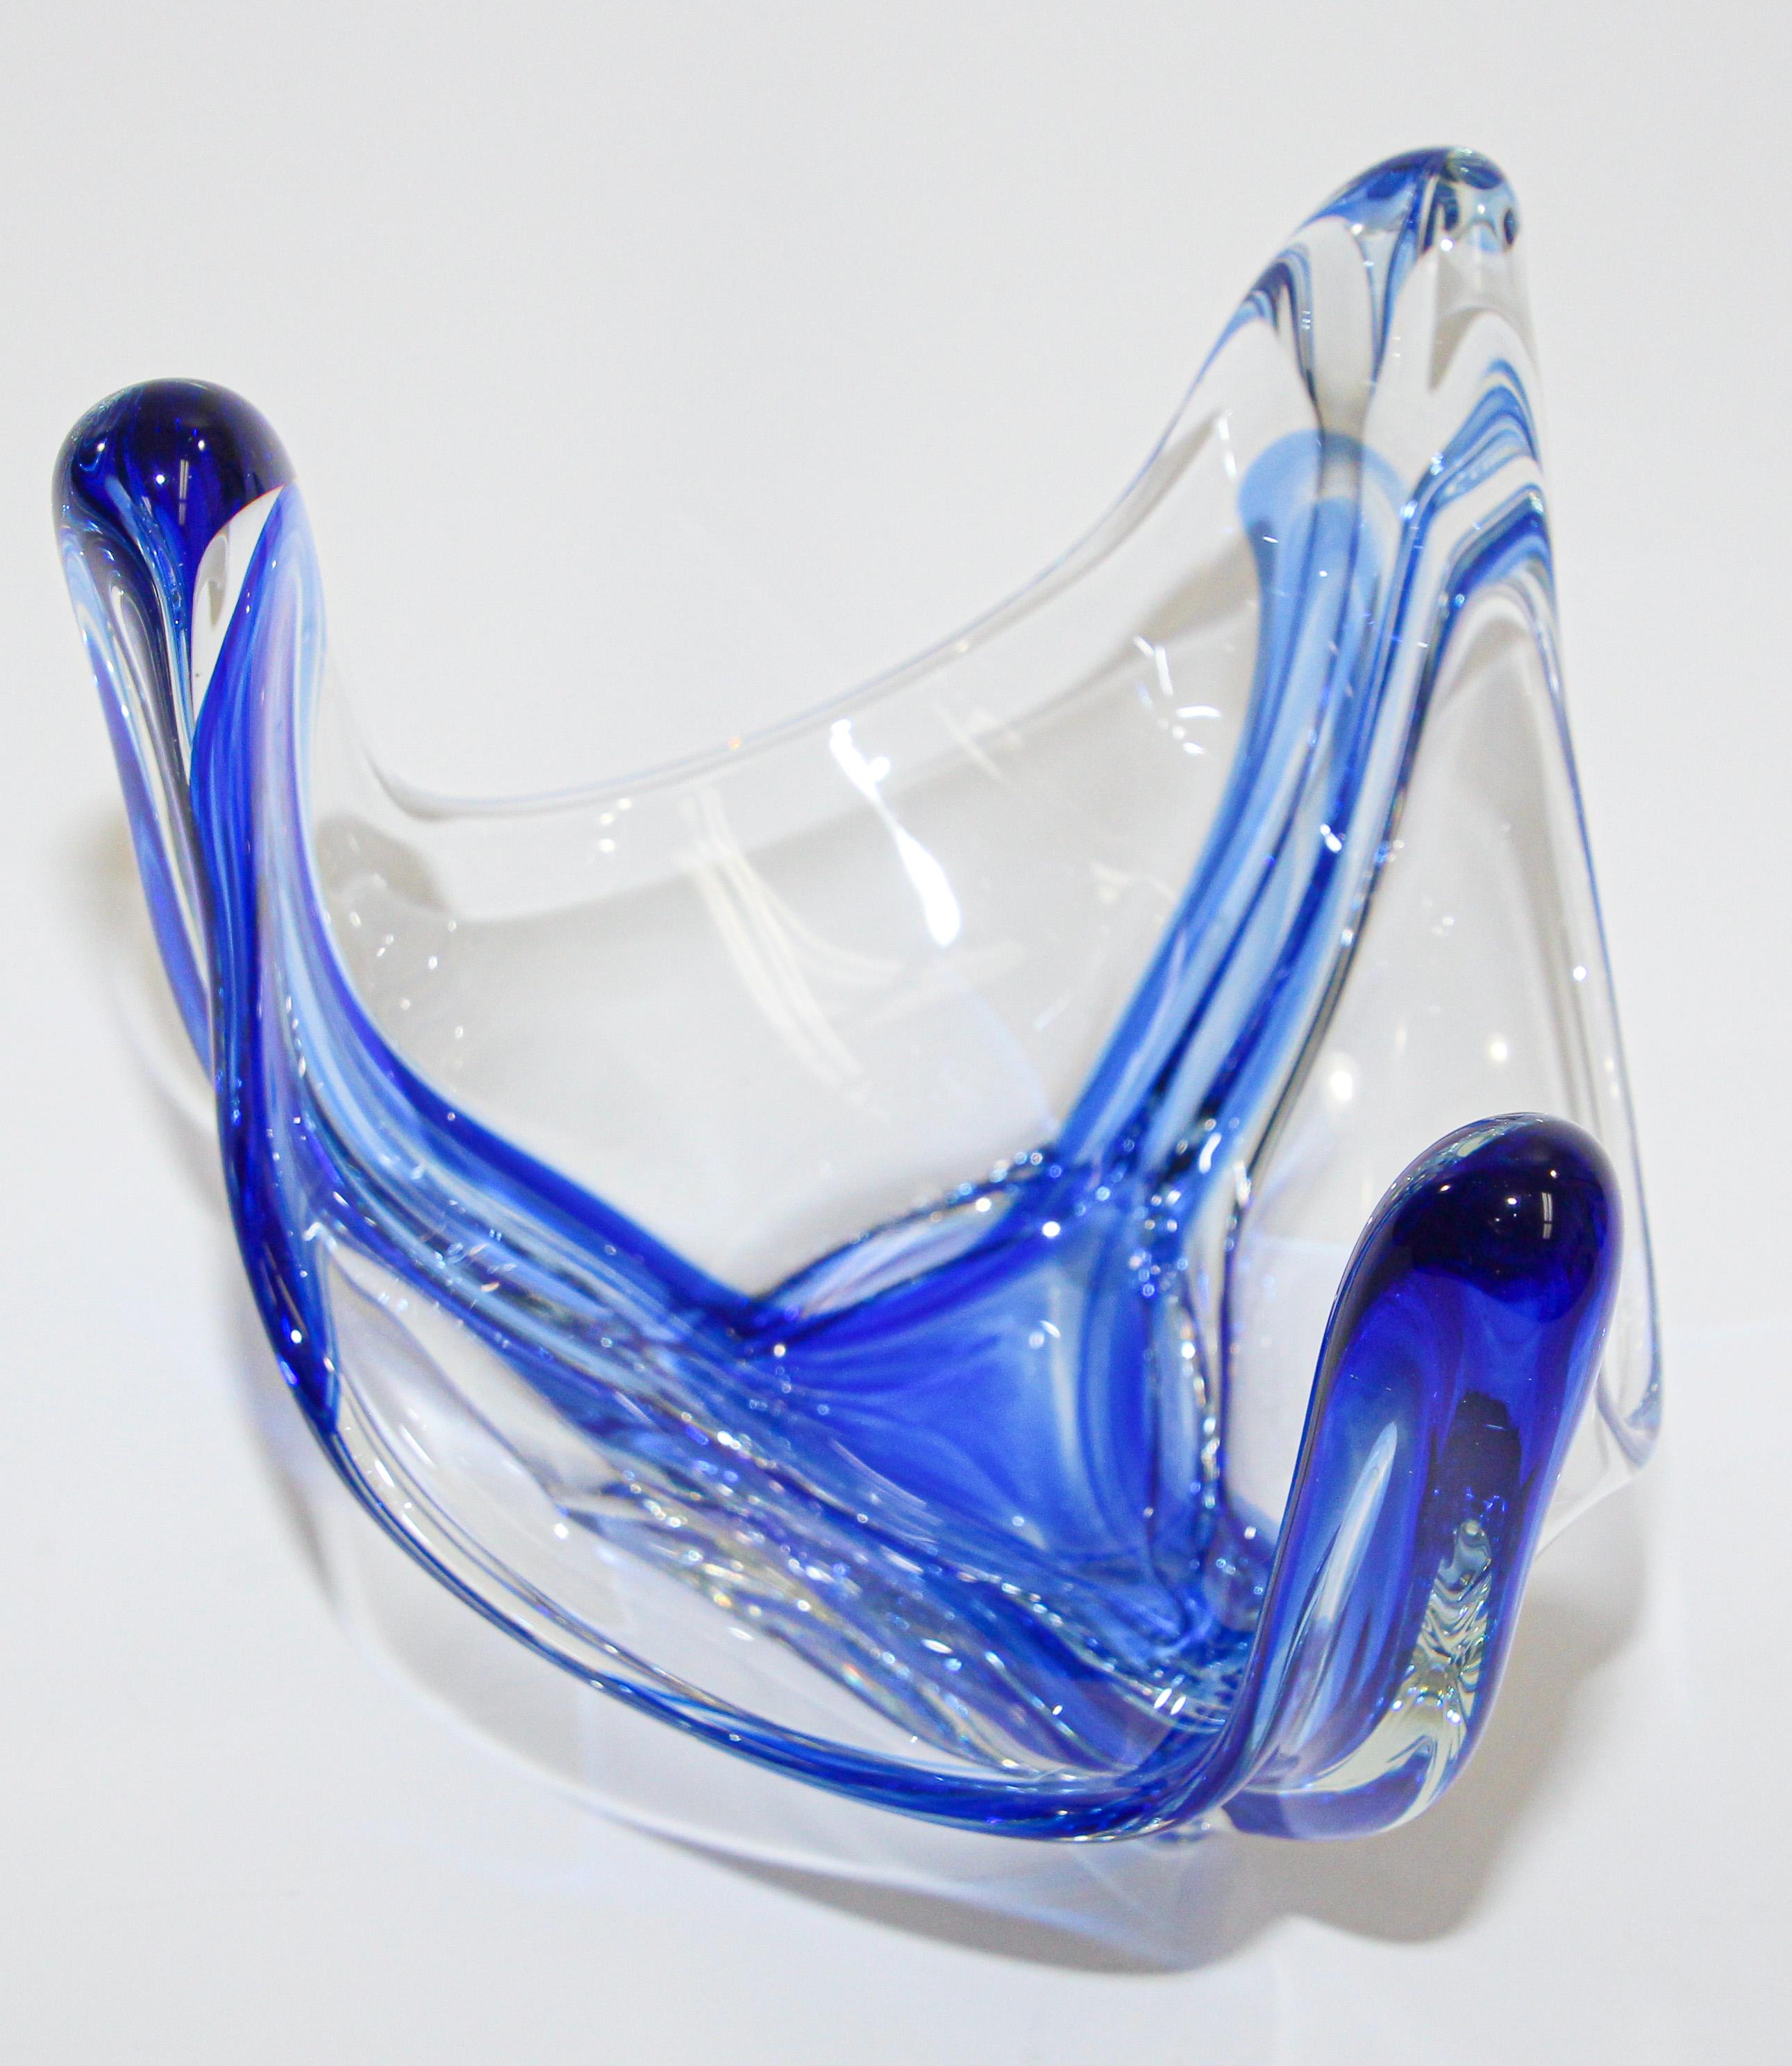 Hand-Crafted Sculptural Blue Large Decorative Hand Blown Murano Glass Bowl